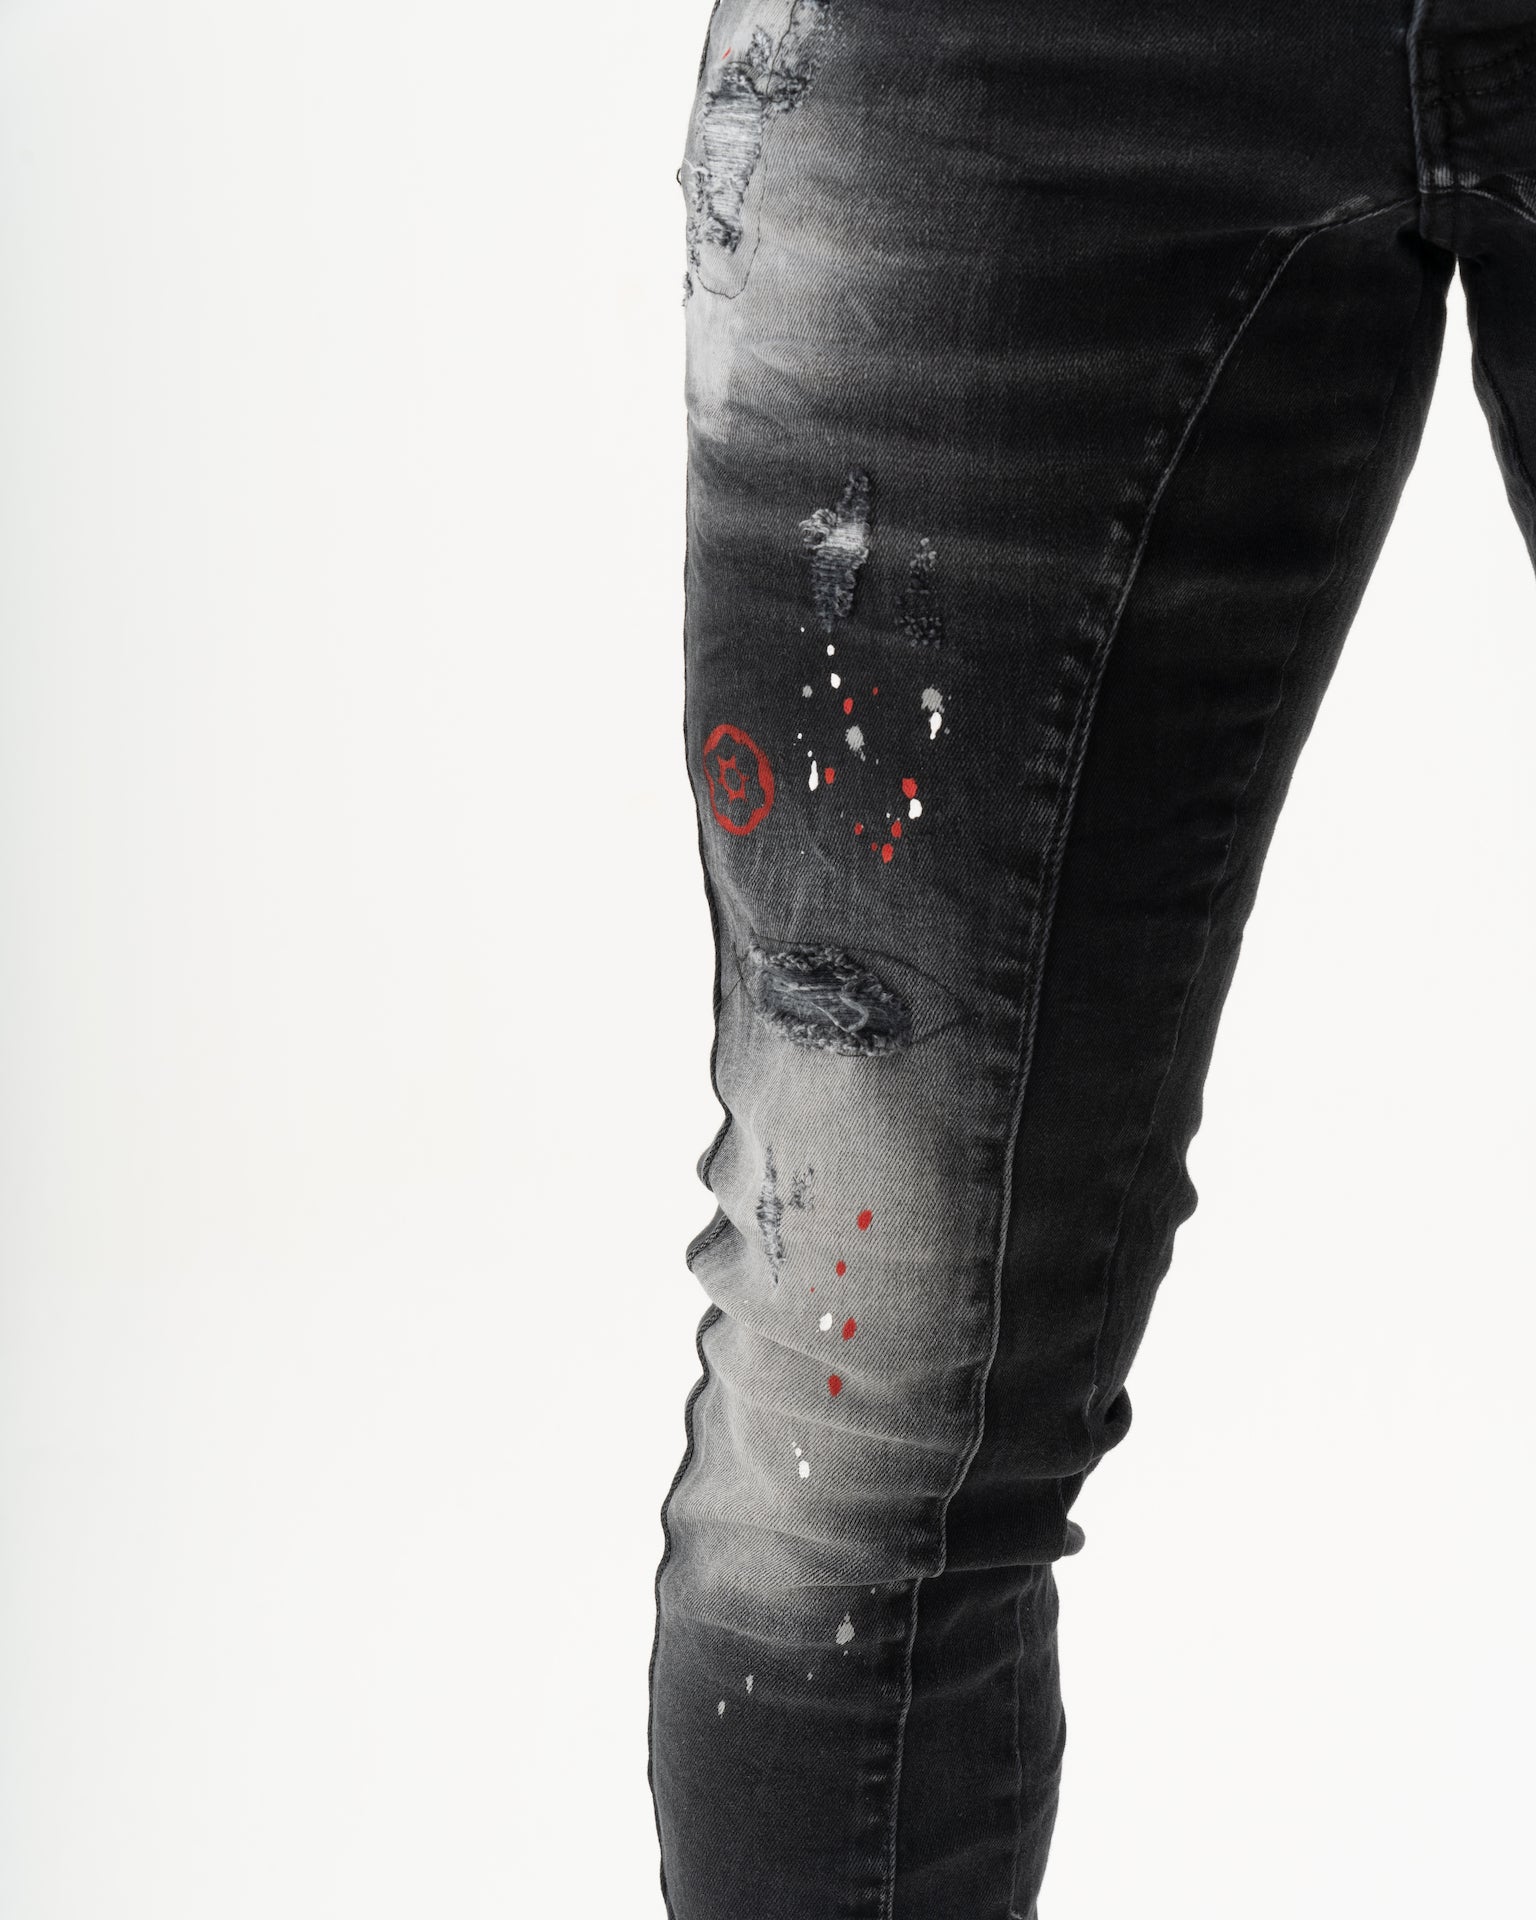 A man wearing a pair of THUNDERBIRD jeans with red paint splattered on them.